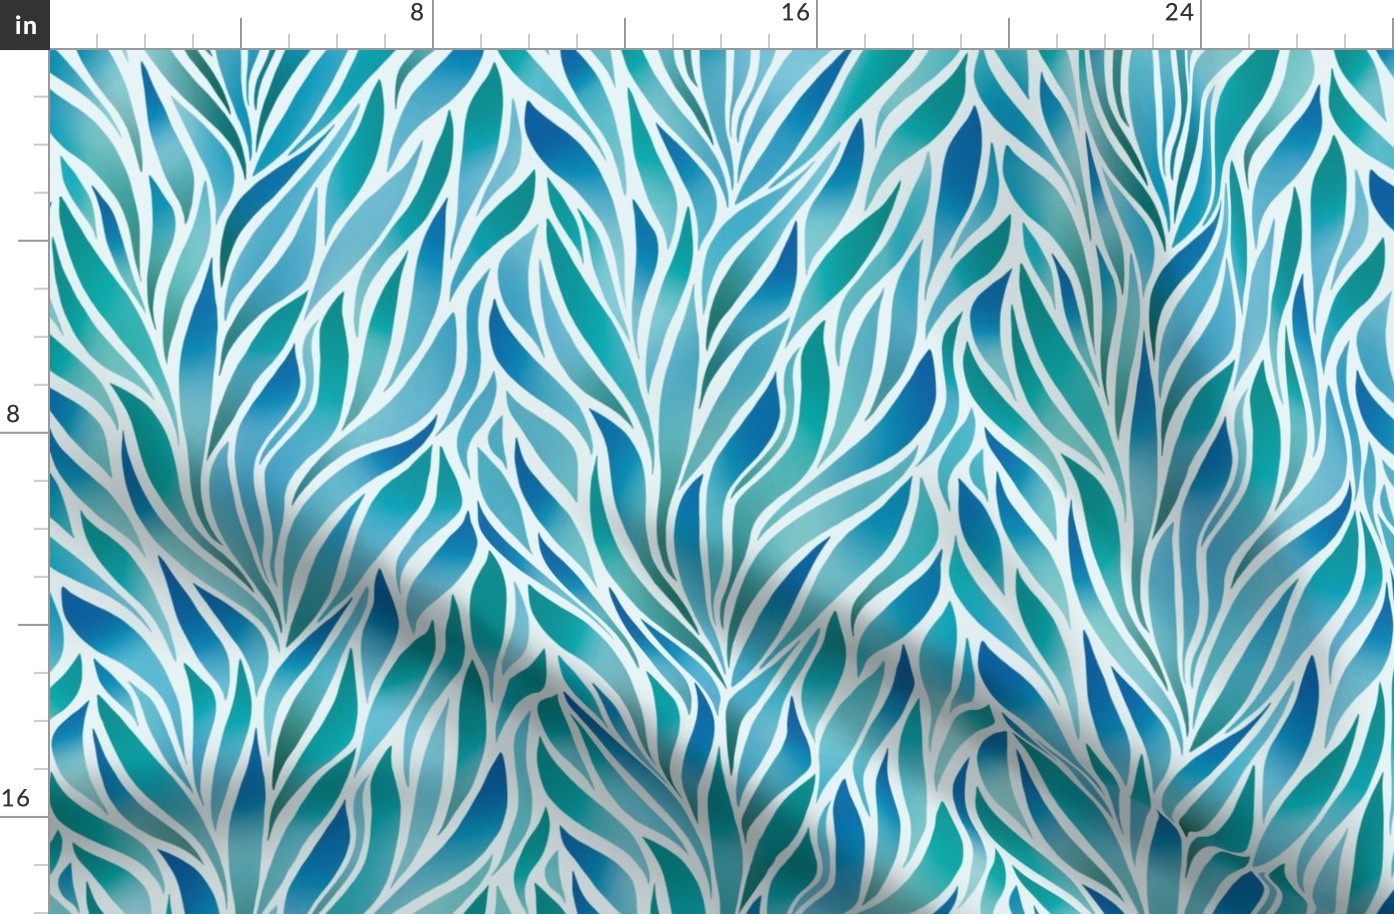 Abstract pantone seaweed - large scale / 18"x21" fabric // 24"x28" wallpaper